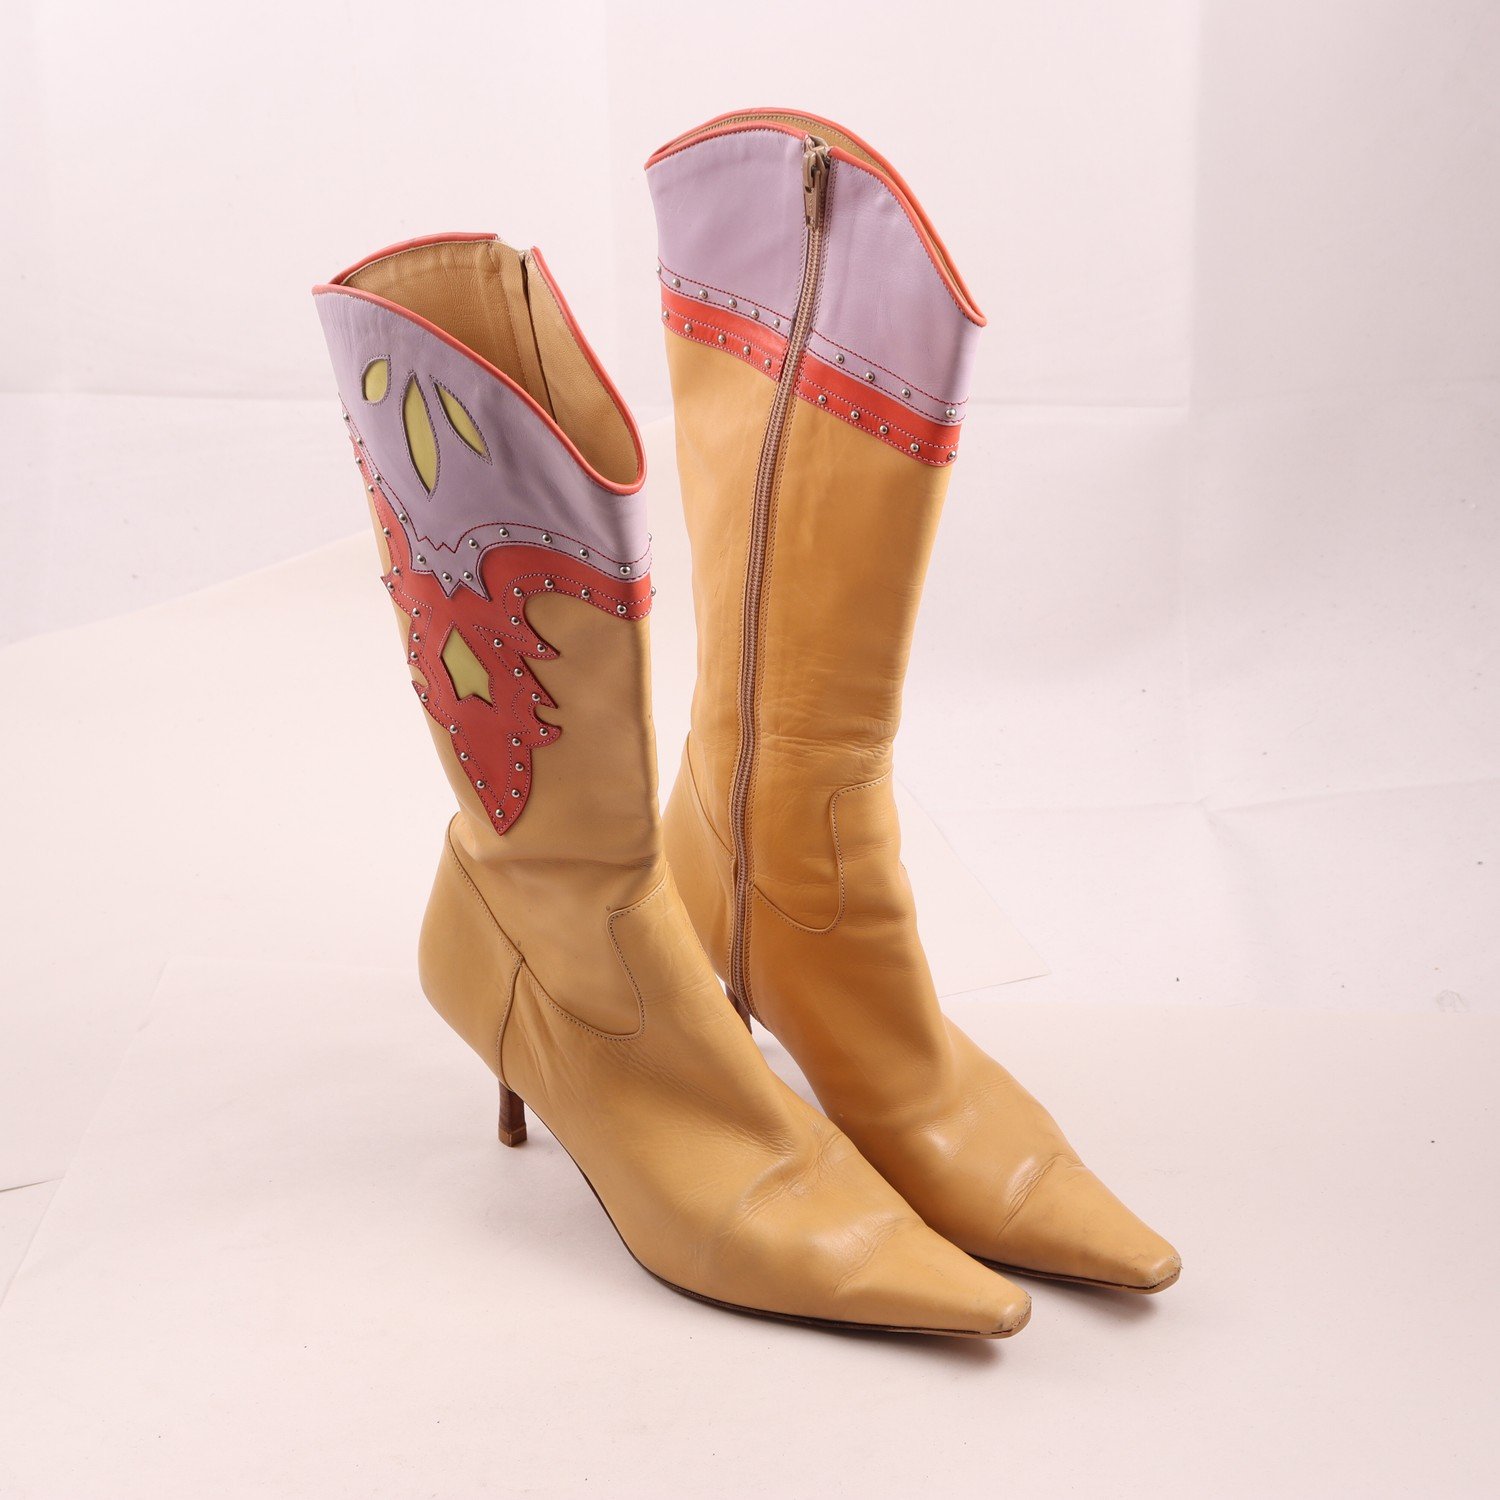 Boots, western country style, läder, stl. 40